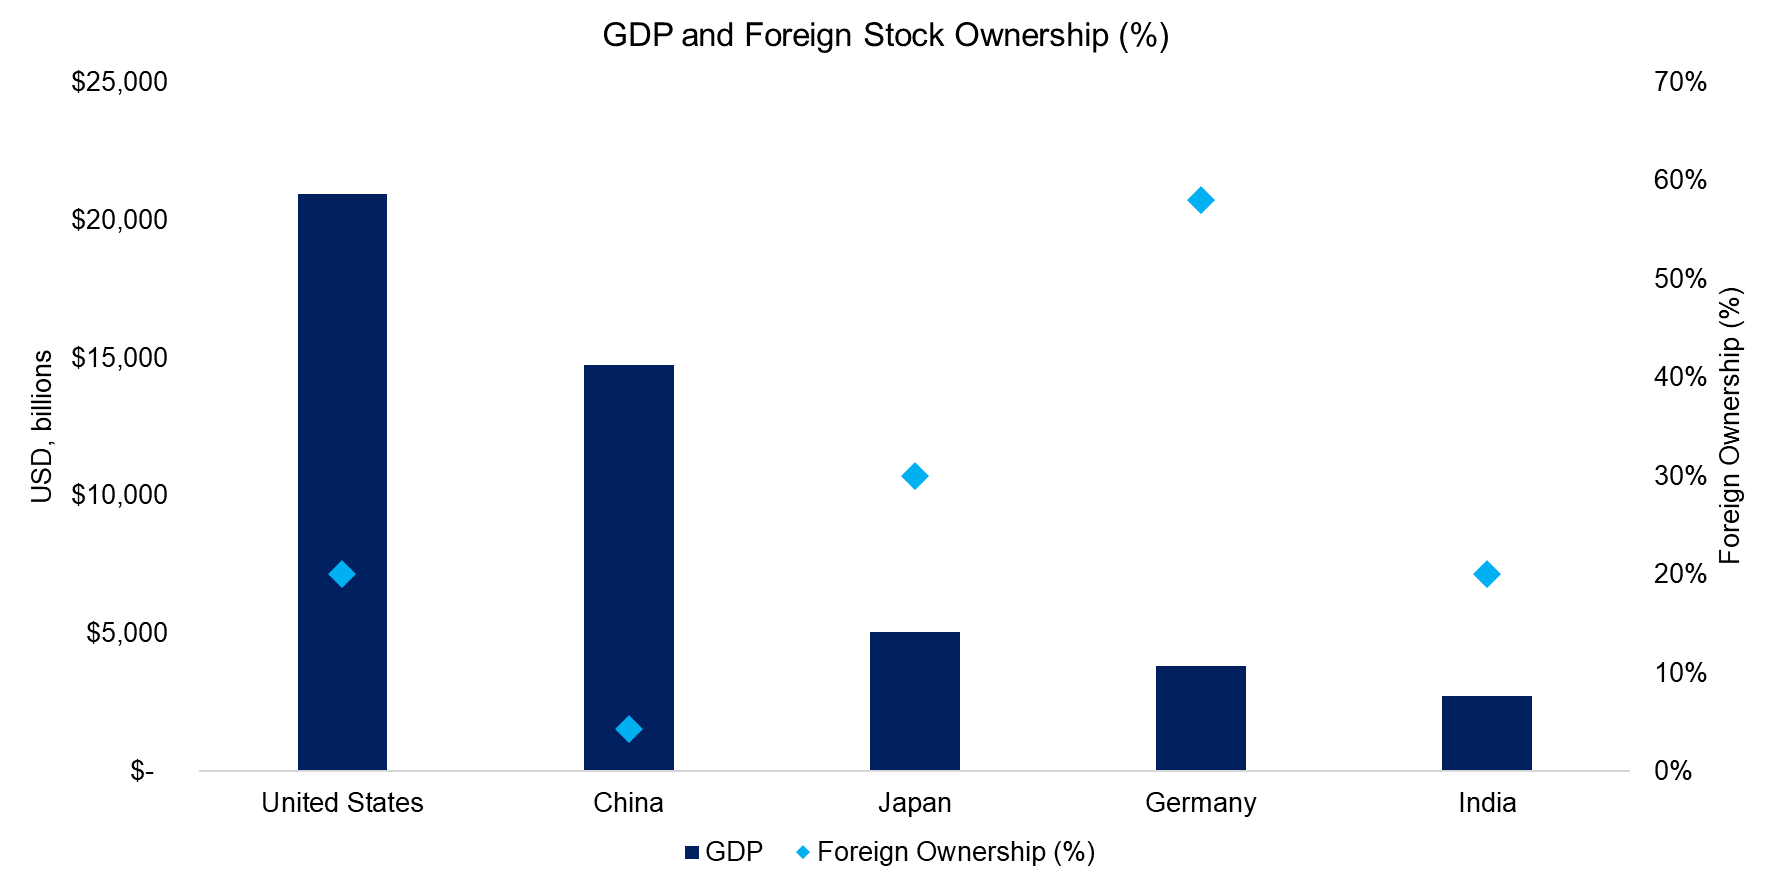 GDP and Foreign Ownership